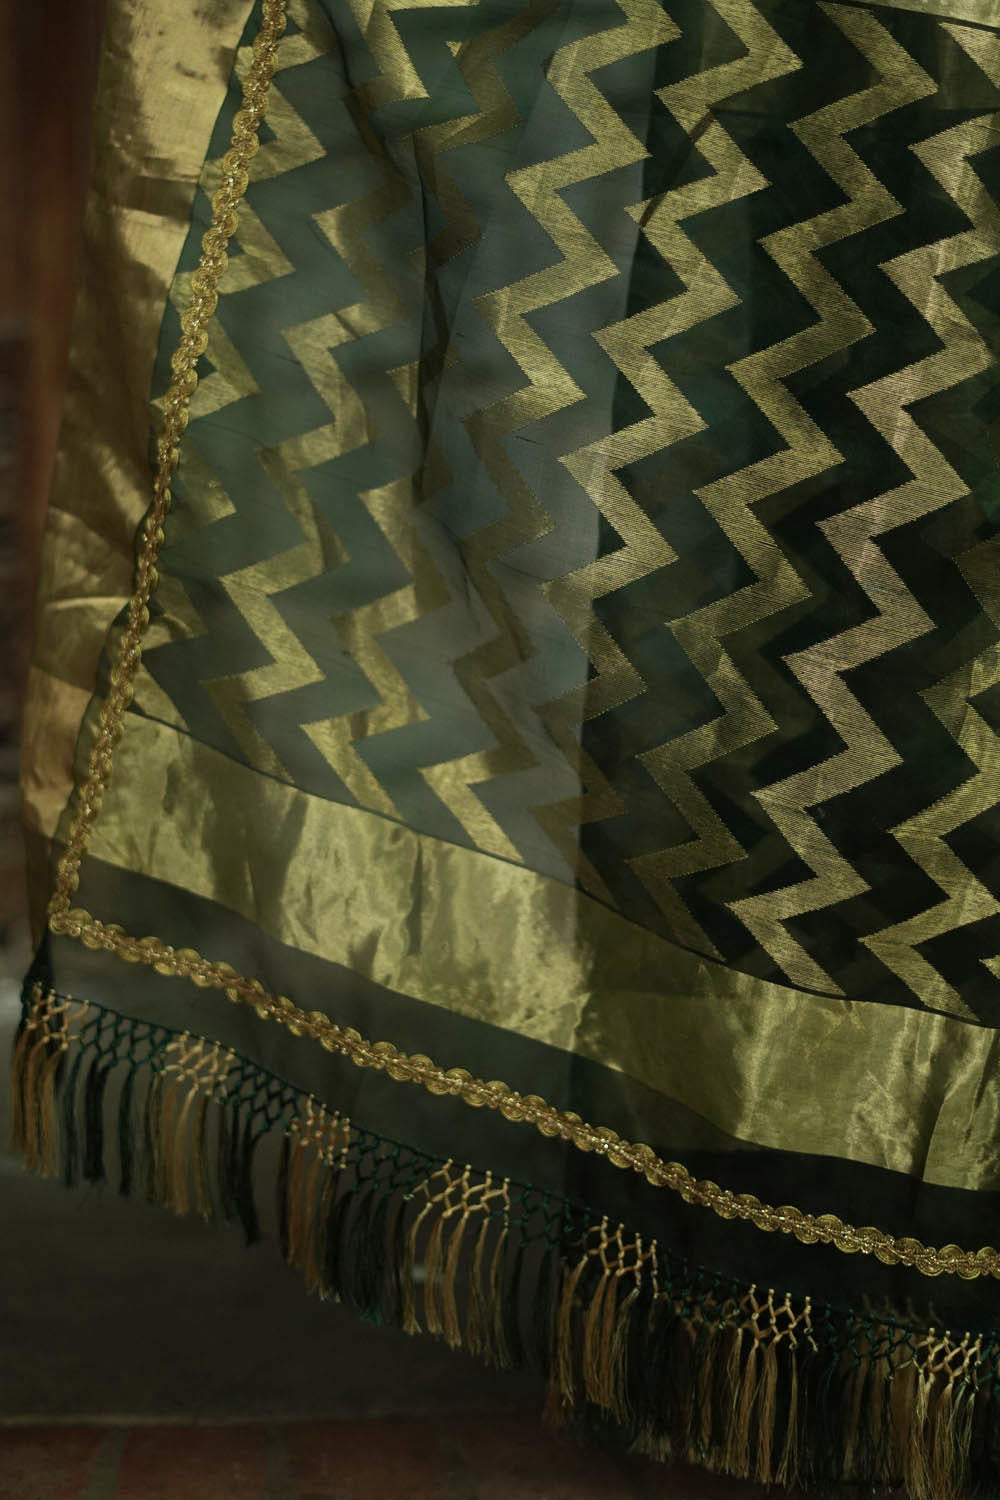 Bottle green chanderi saree with gold zari buttis and gold tissue border with gold lace.